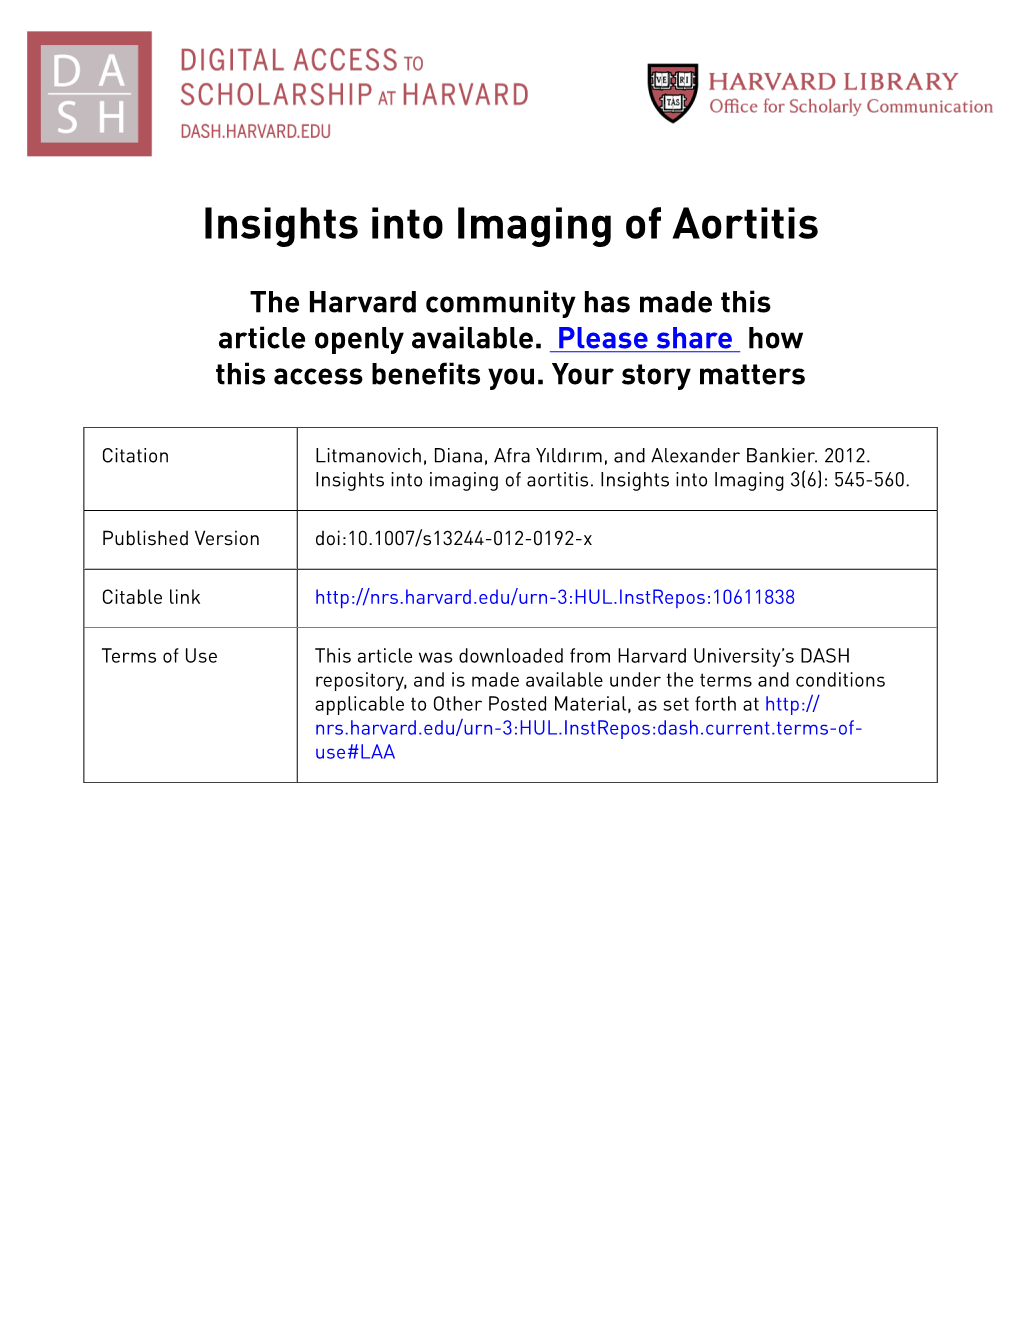 Insights Into Imaging of Aortitis